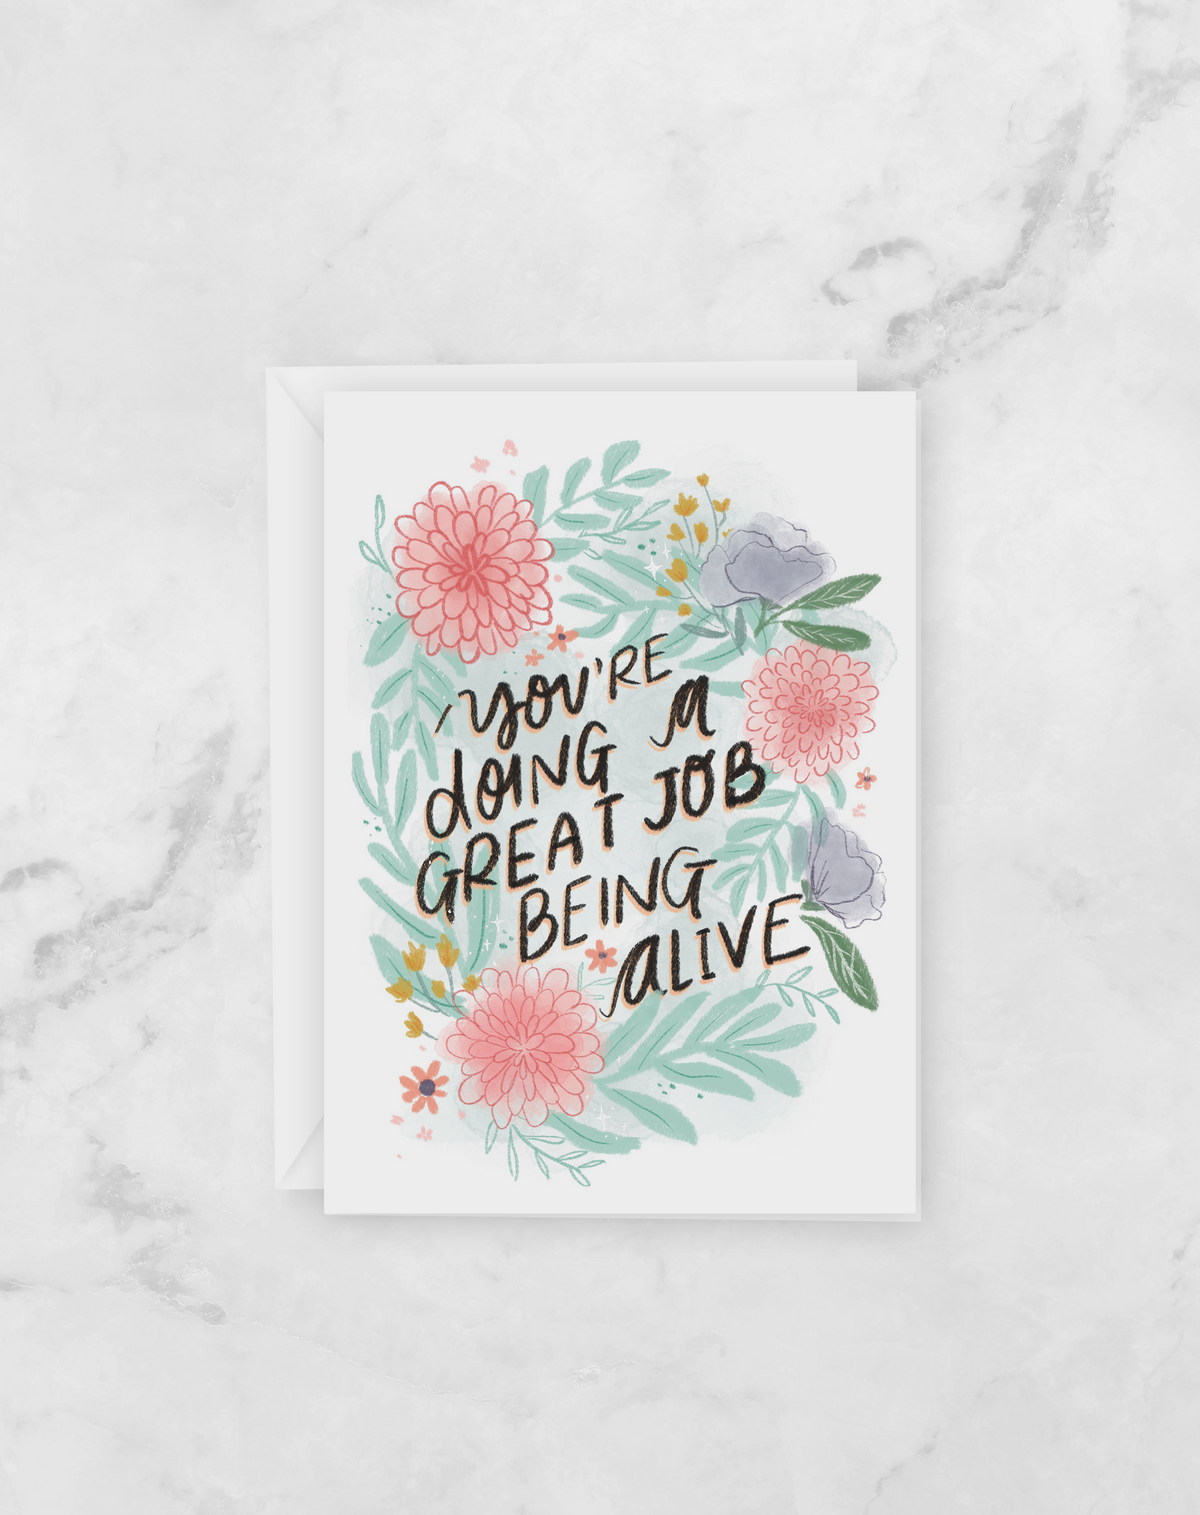 Greeting Card - Encouragement - Adulting is hard - doing great - card for friend